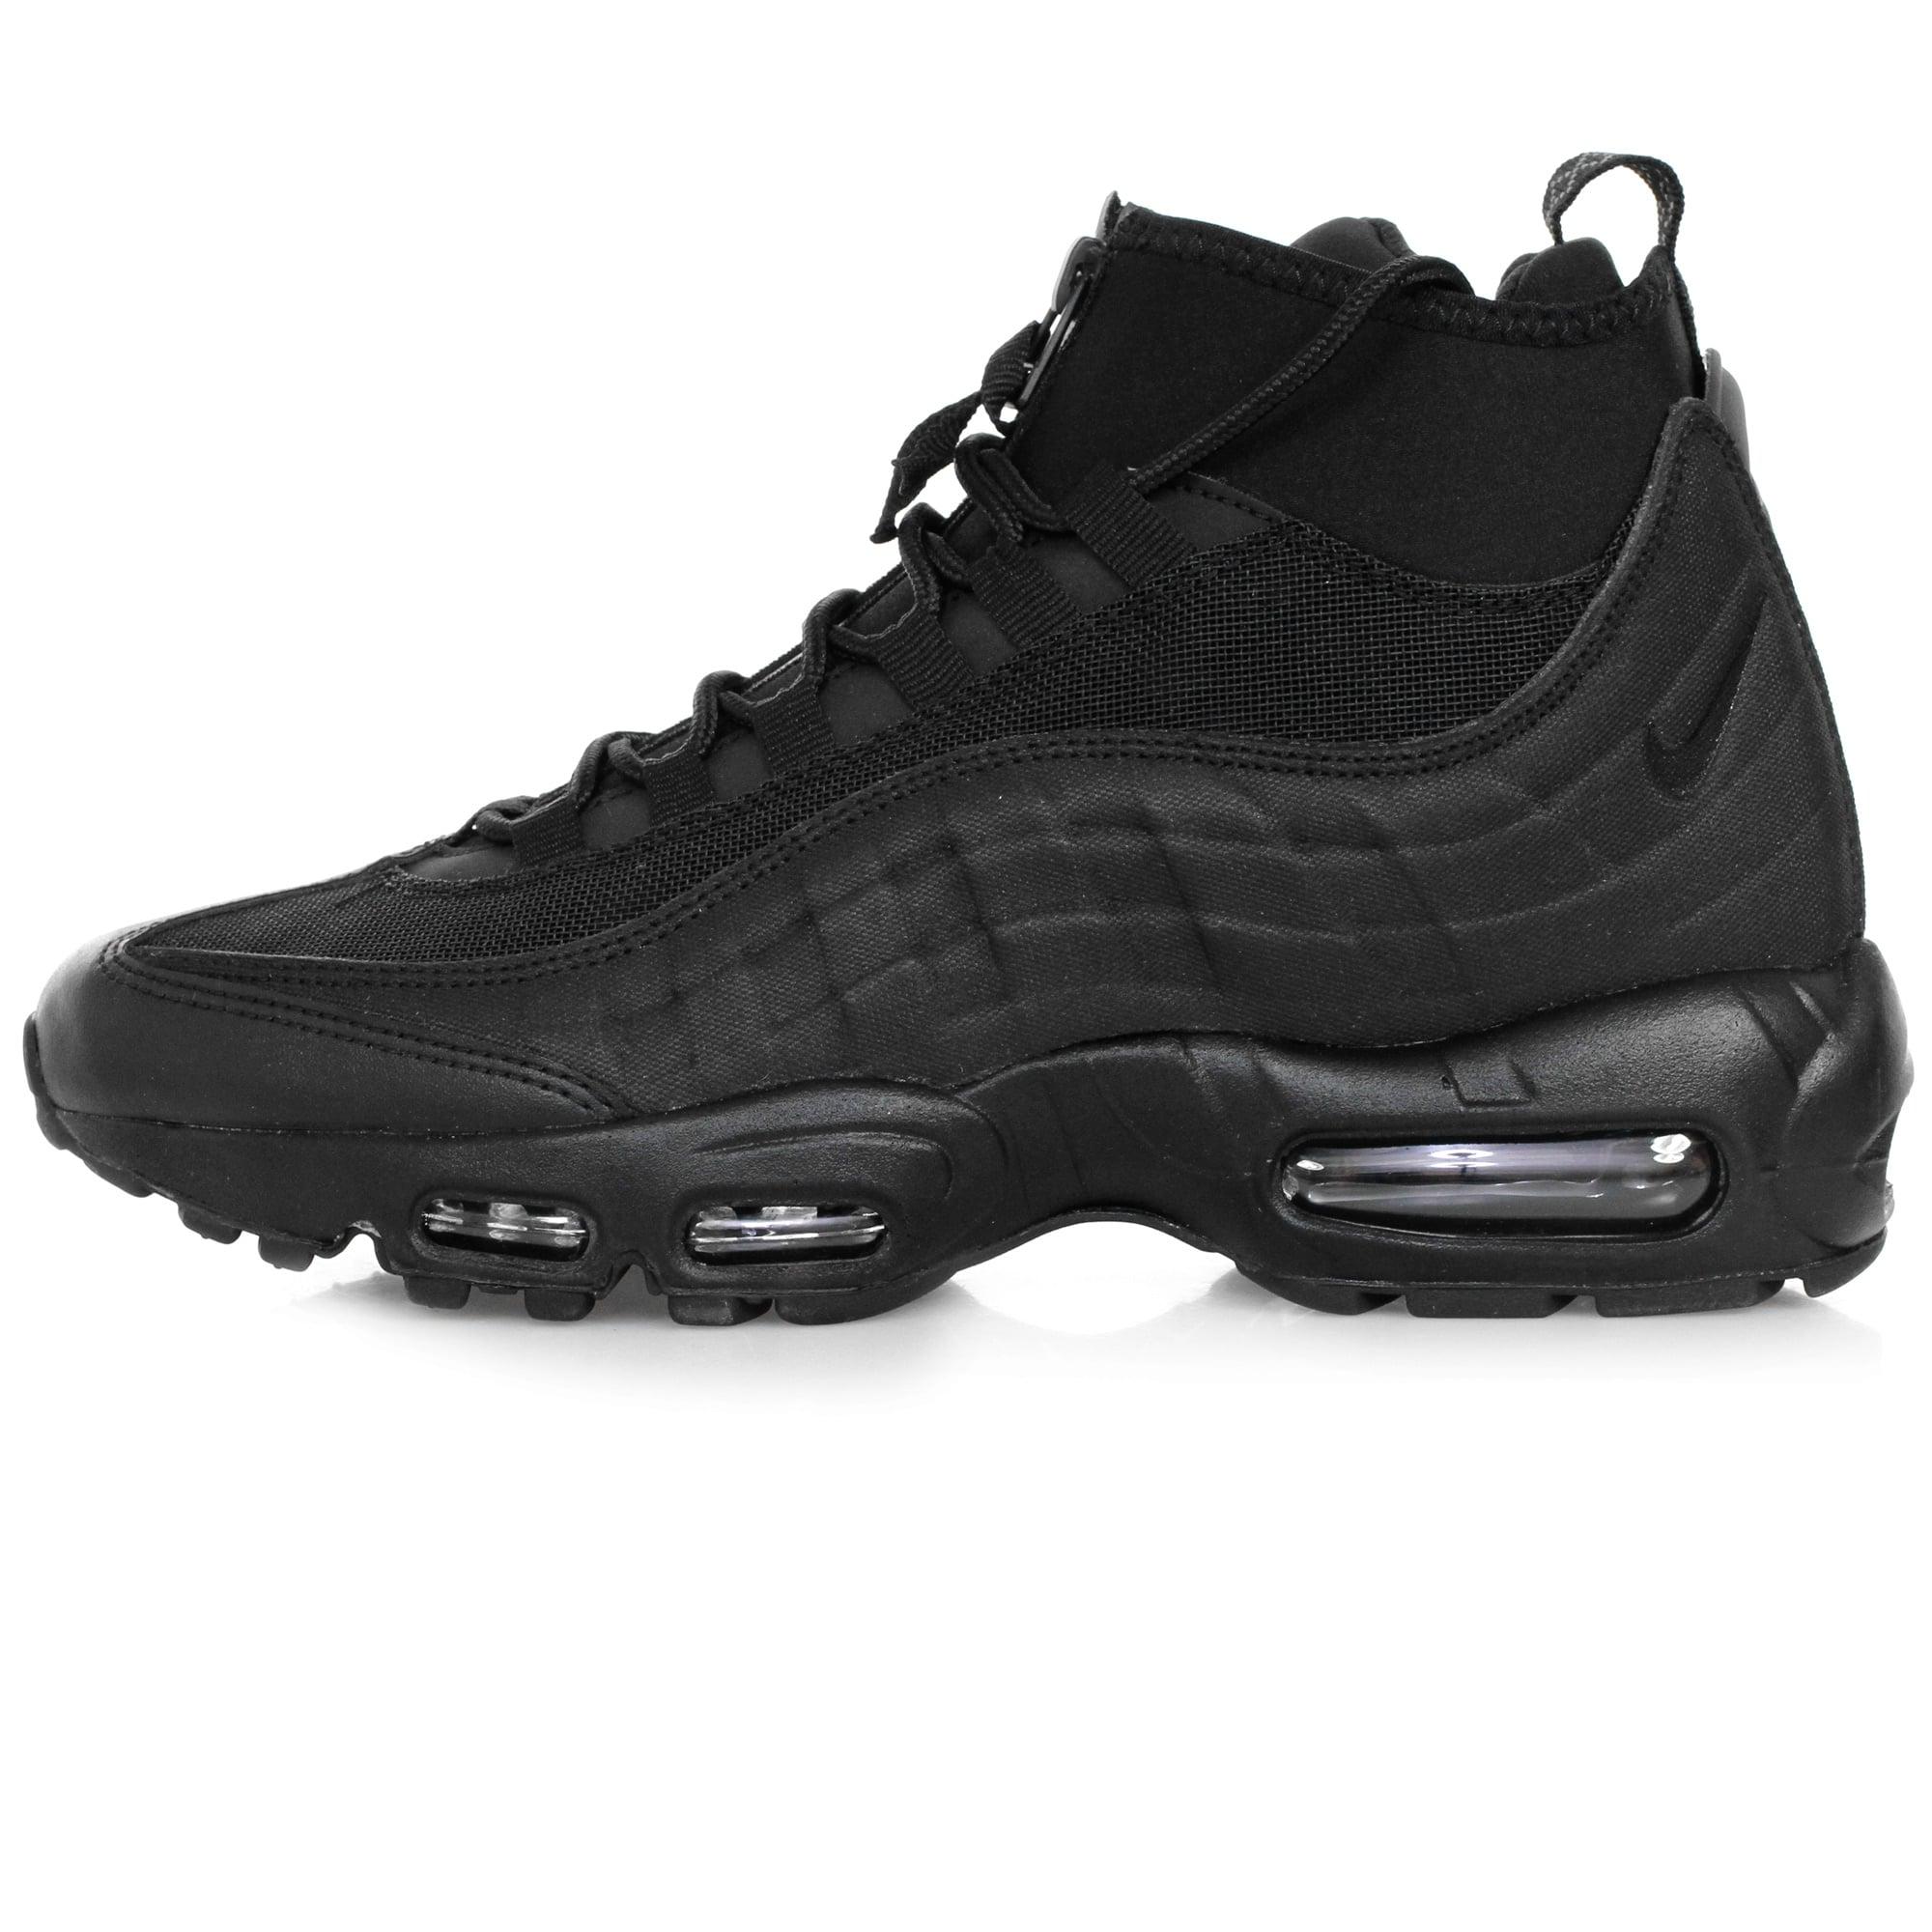 Nike Leather Air Max 95 Sneakerboot Black Shoe 806809 002 For Men Lyst